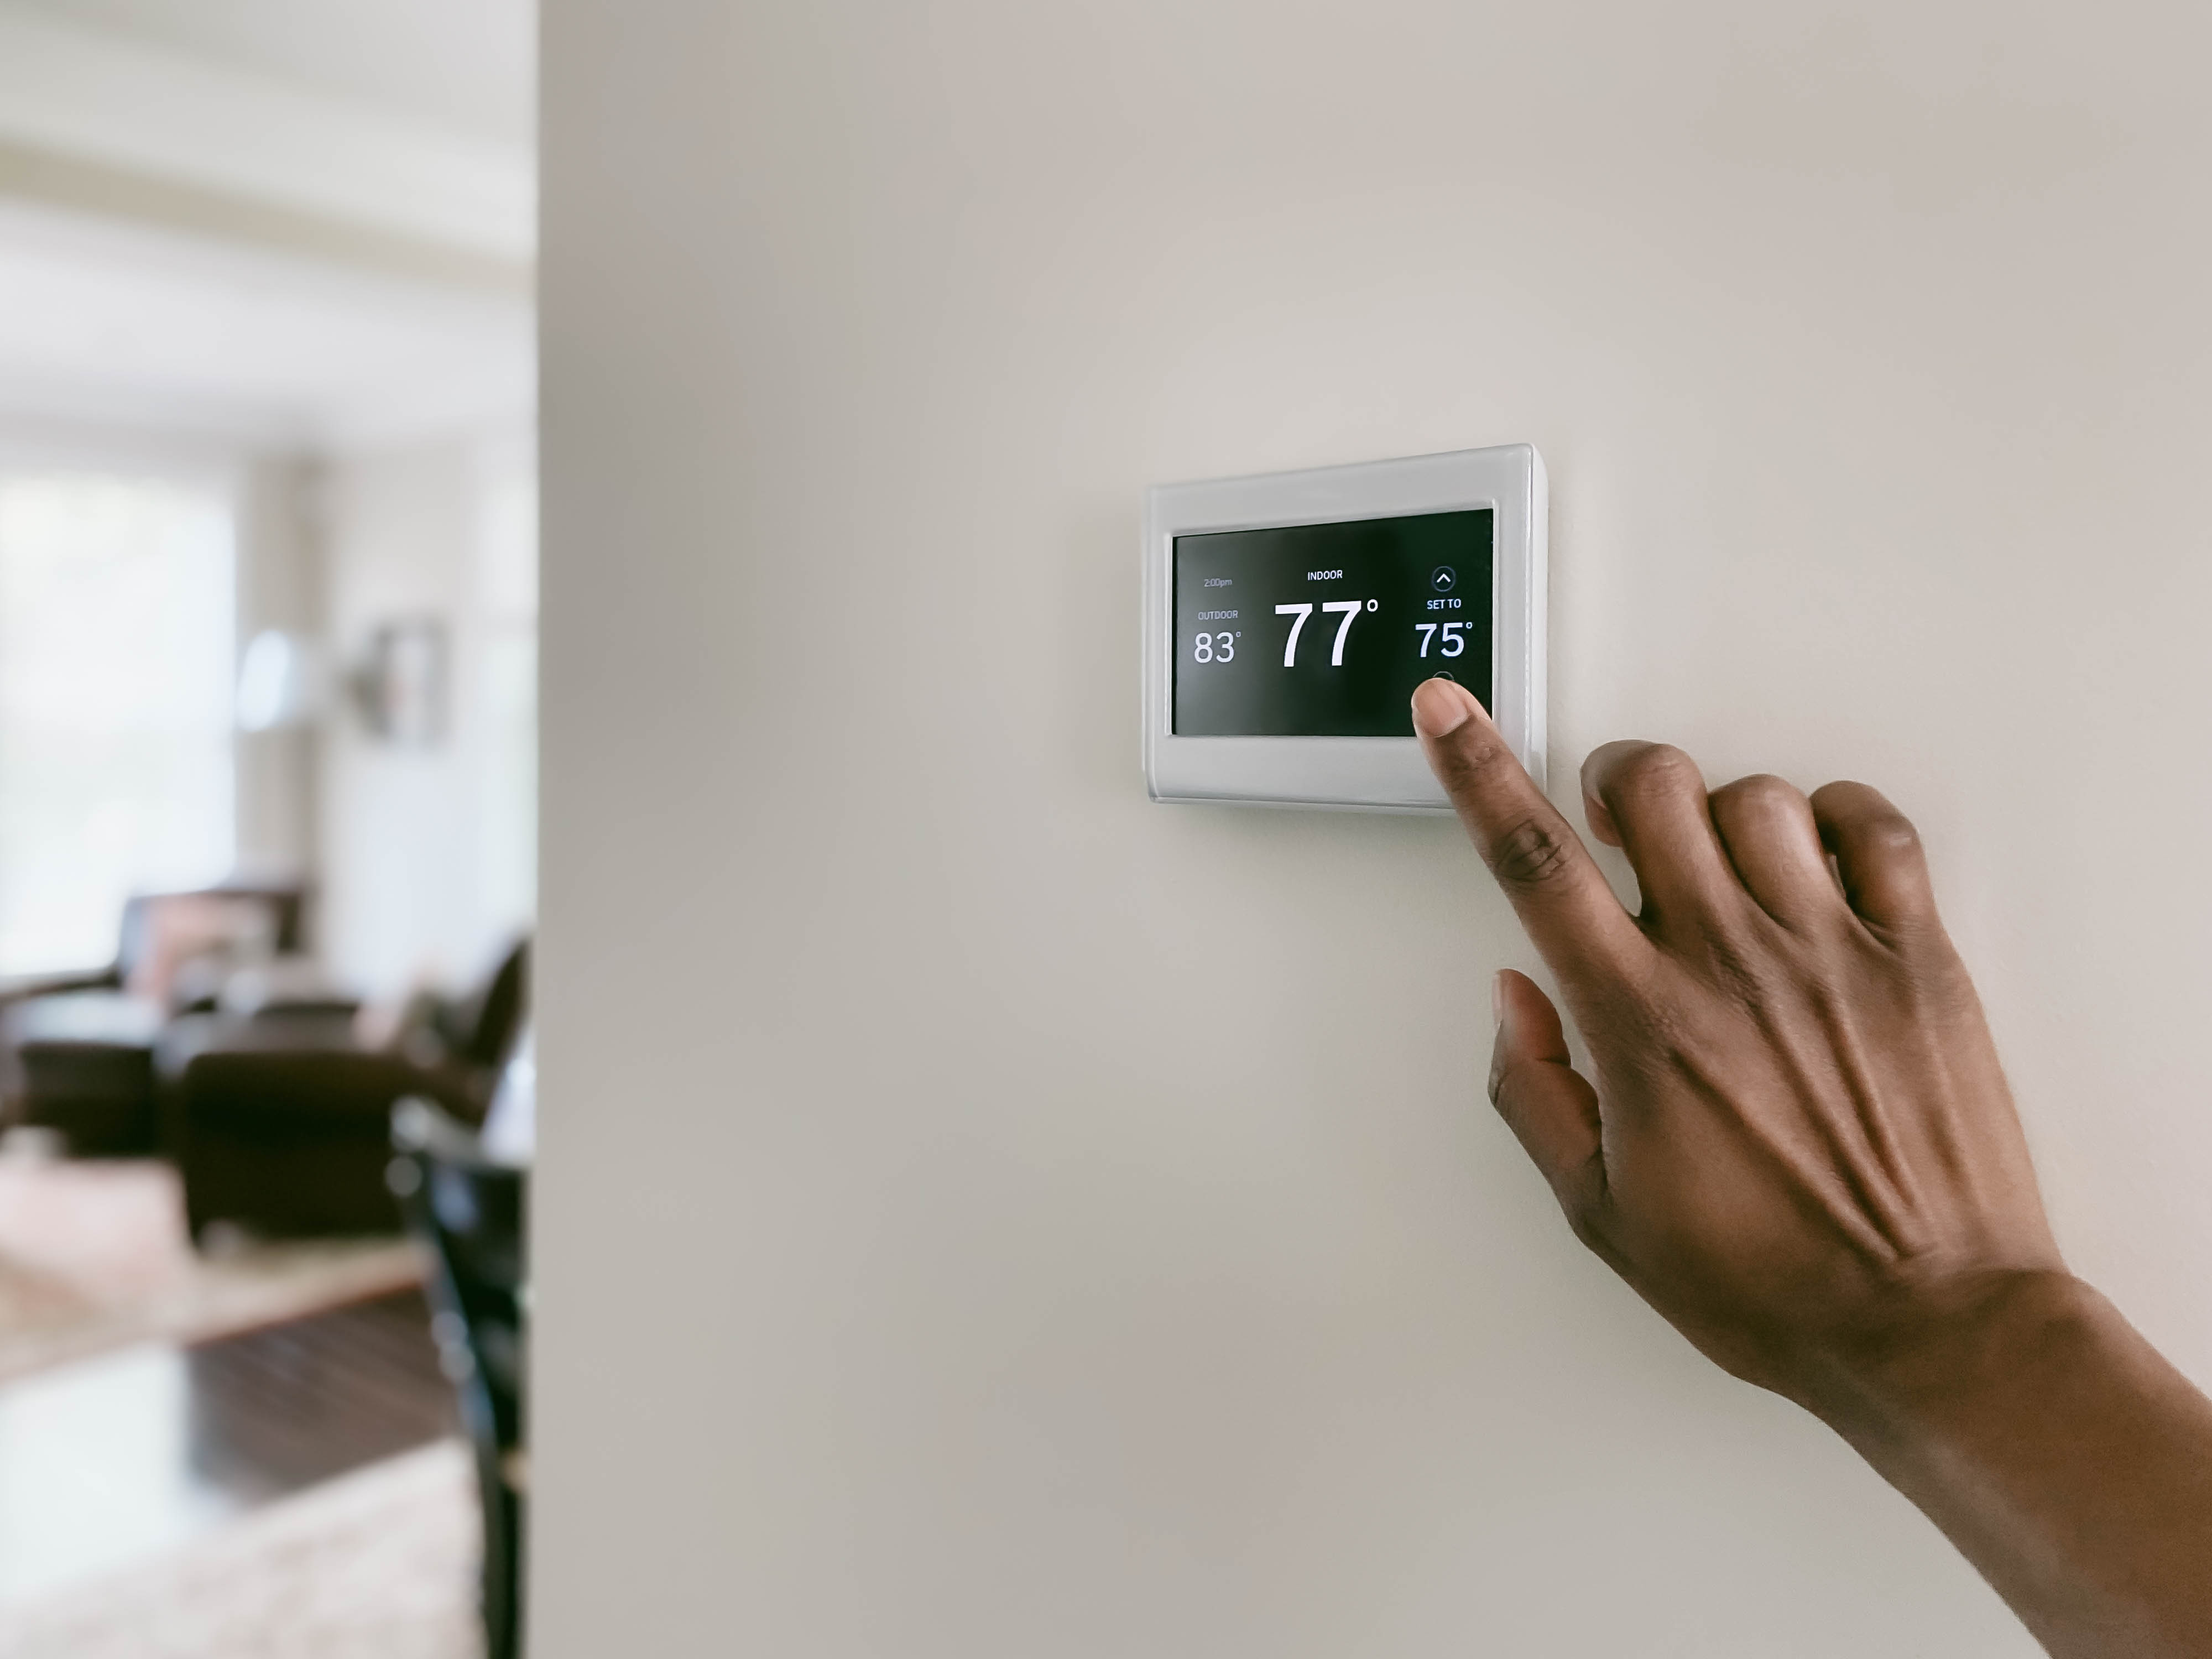 How to Tell if Your Home Thermostat is Bad - Bypass it and Find